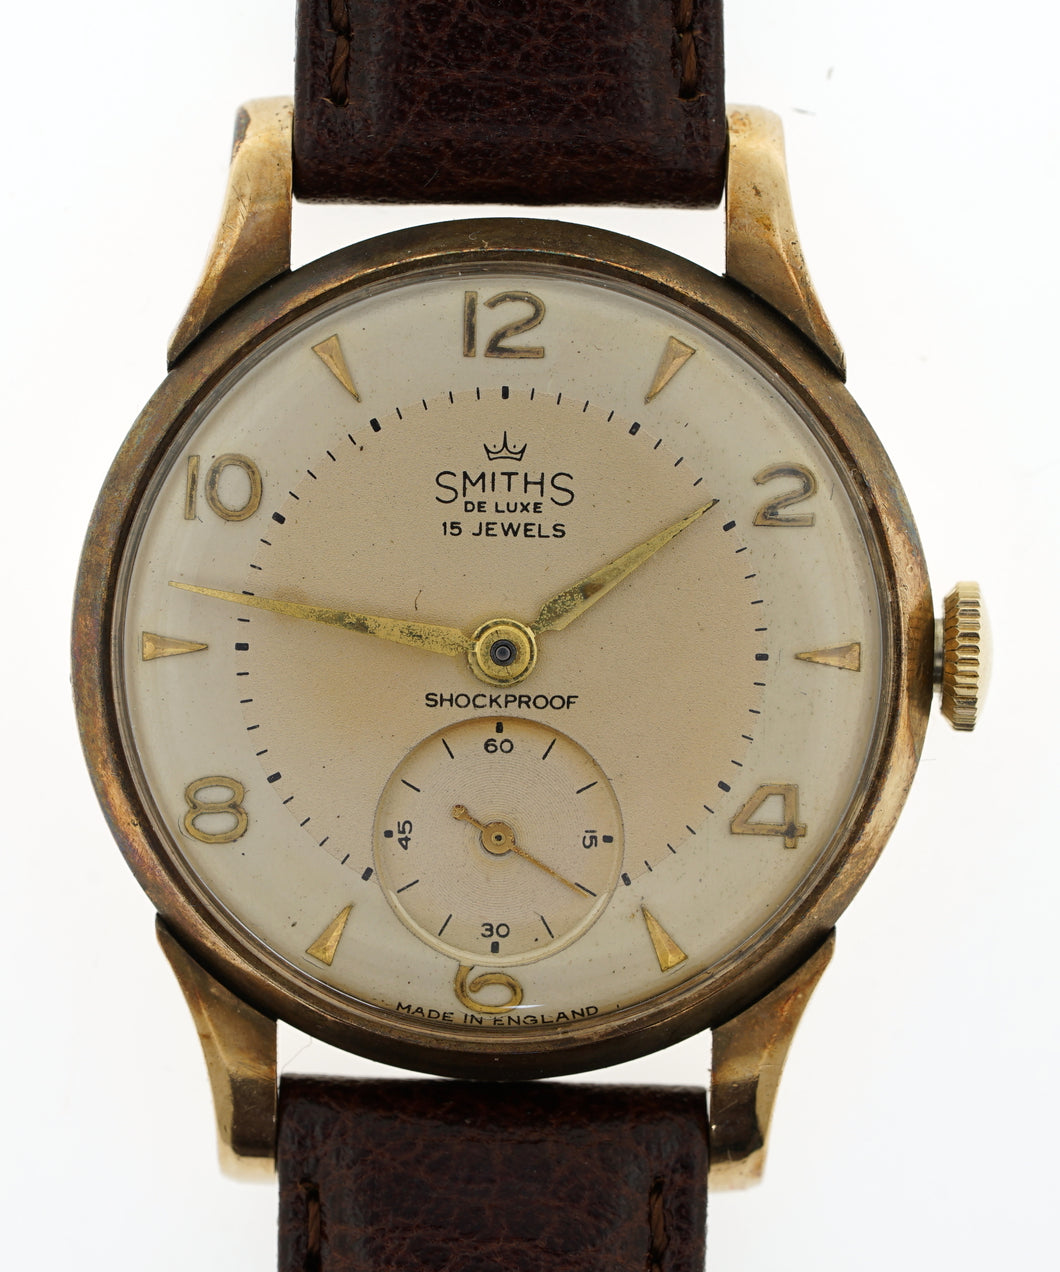 DELUXE SMITHS A504 HALLMARKED SOLID 9T GOLD 1959 PRESENTATION WATCH